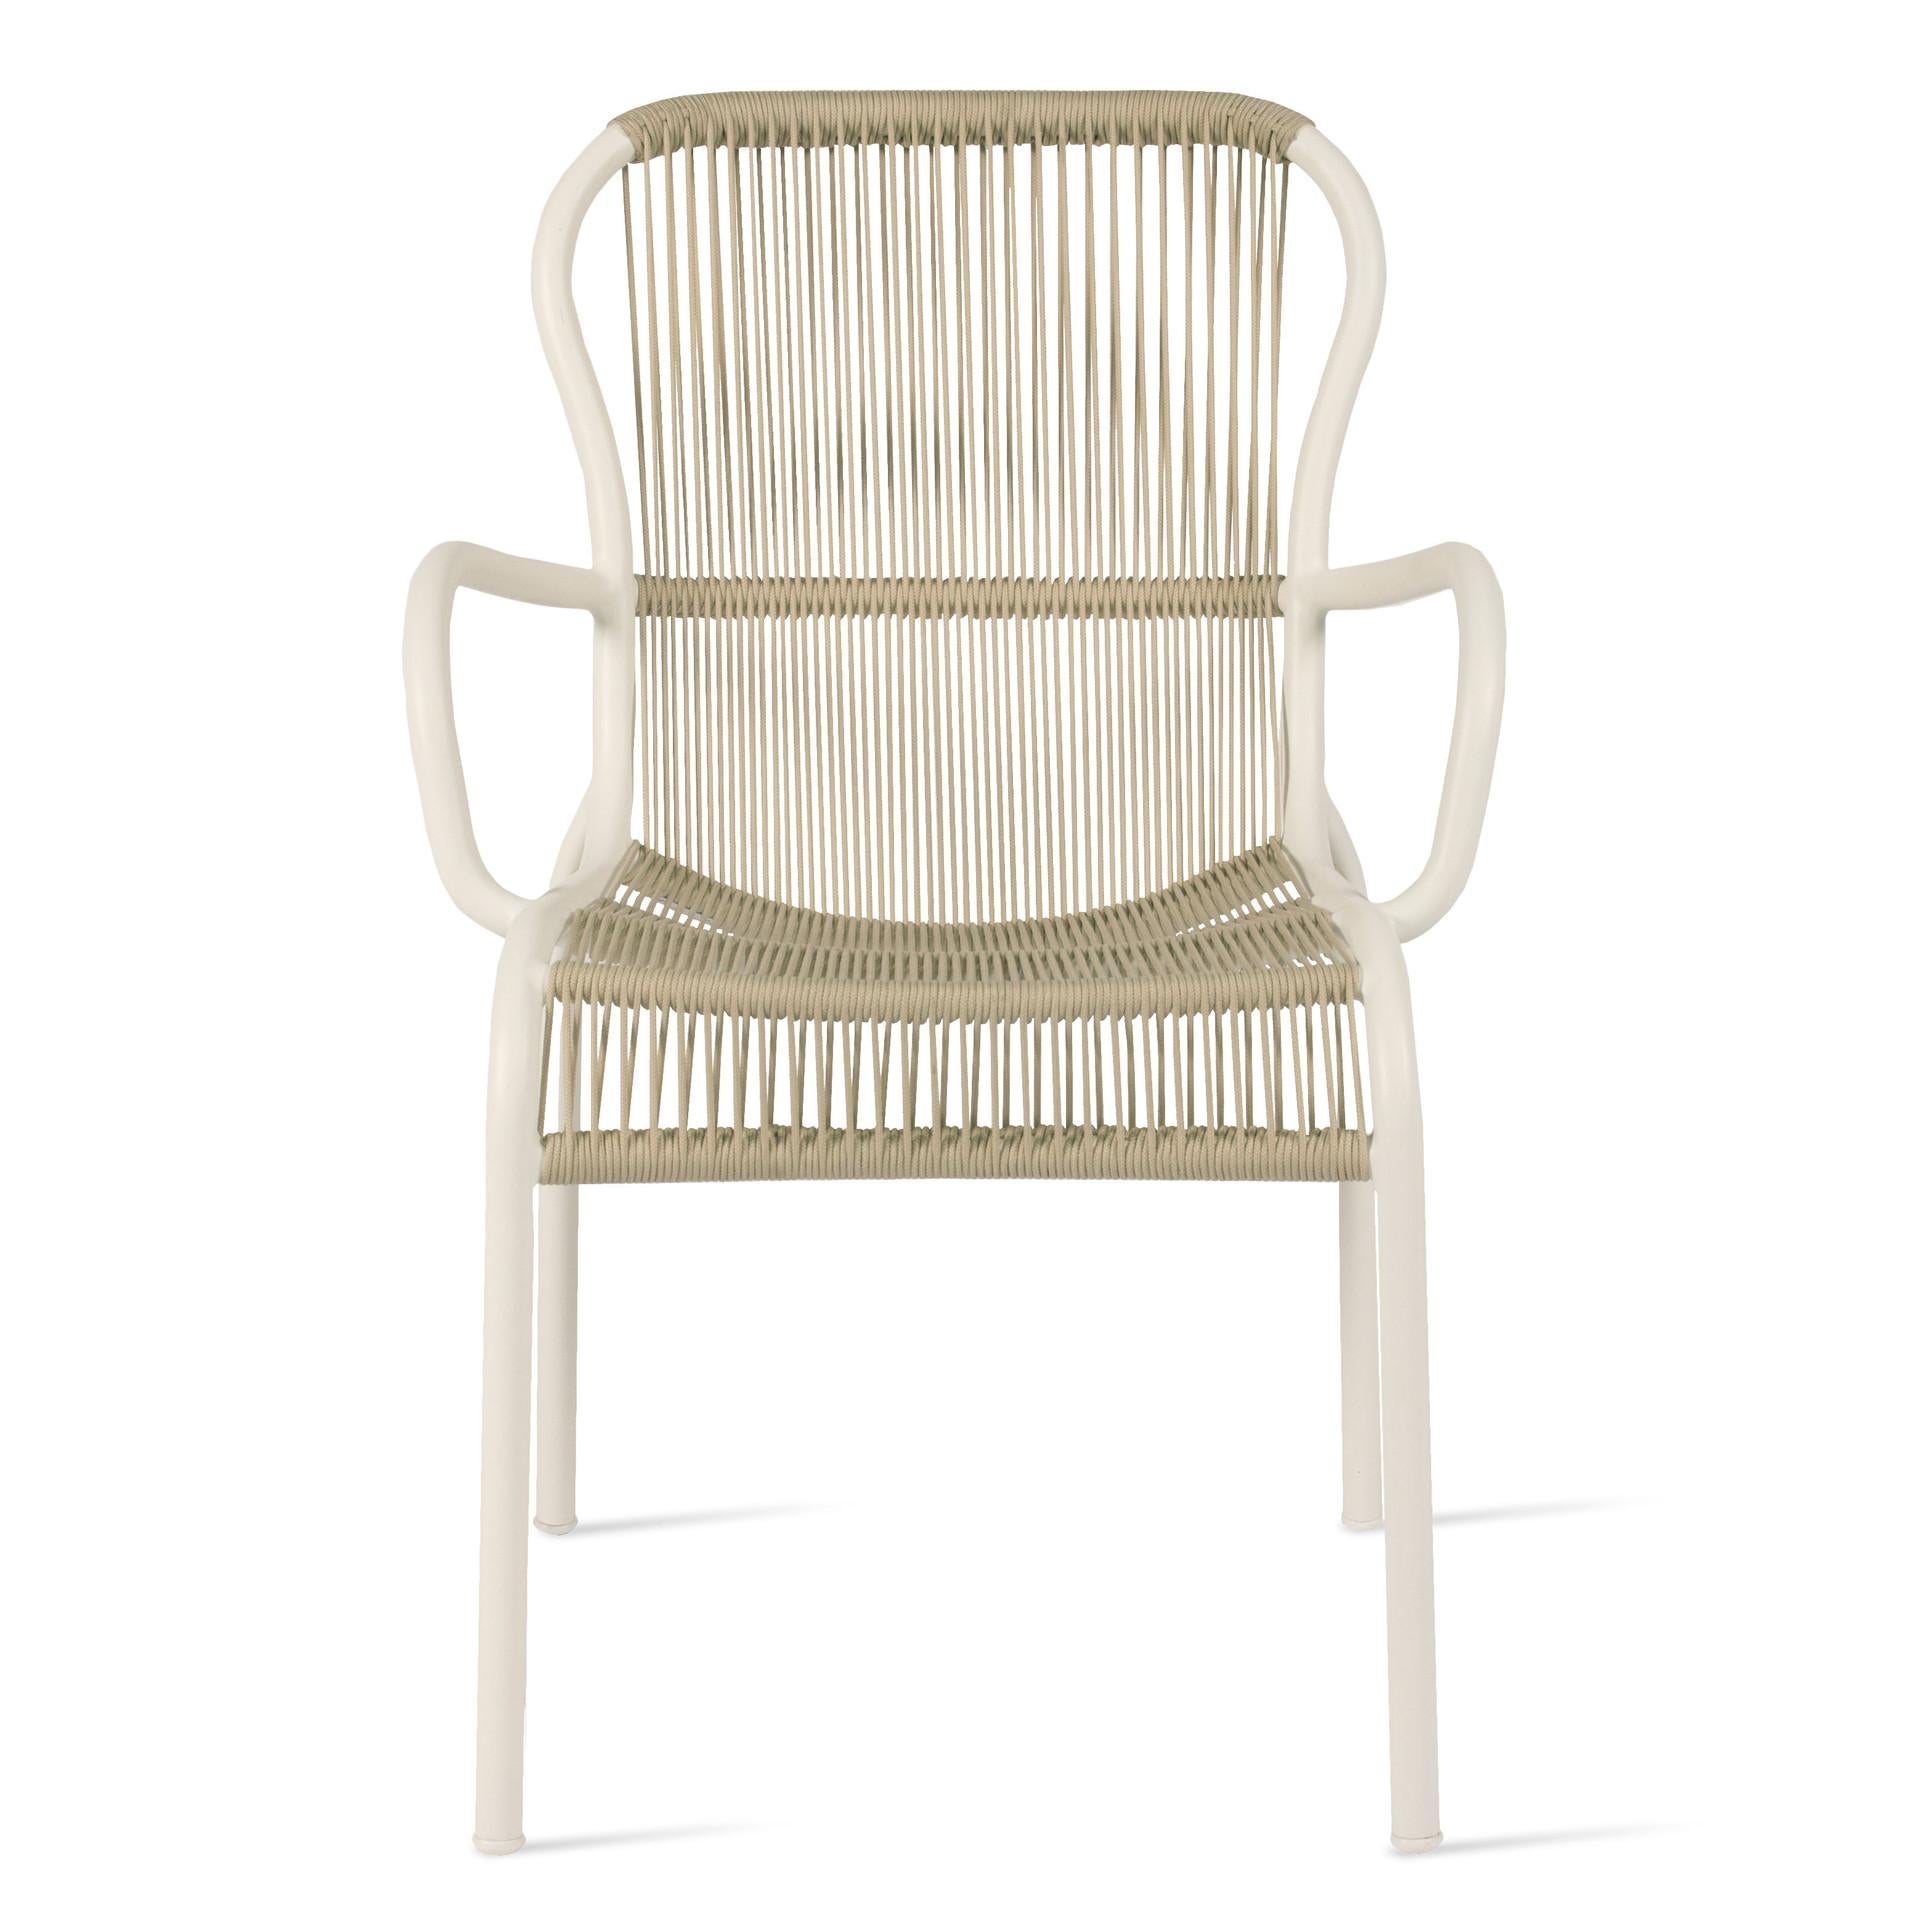 The Loop dining chair is a light and stackable outdoor chair.